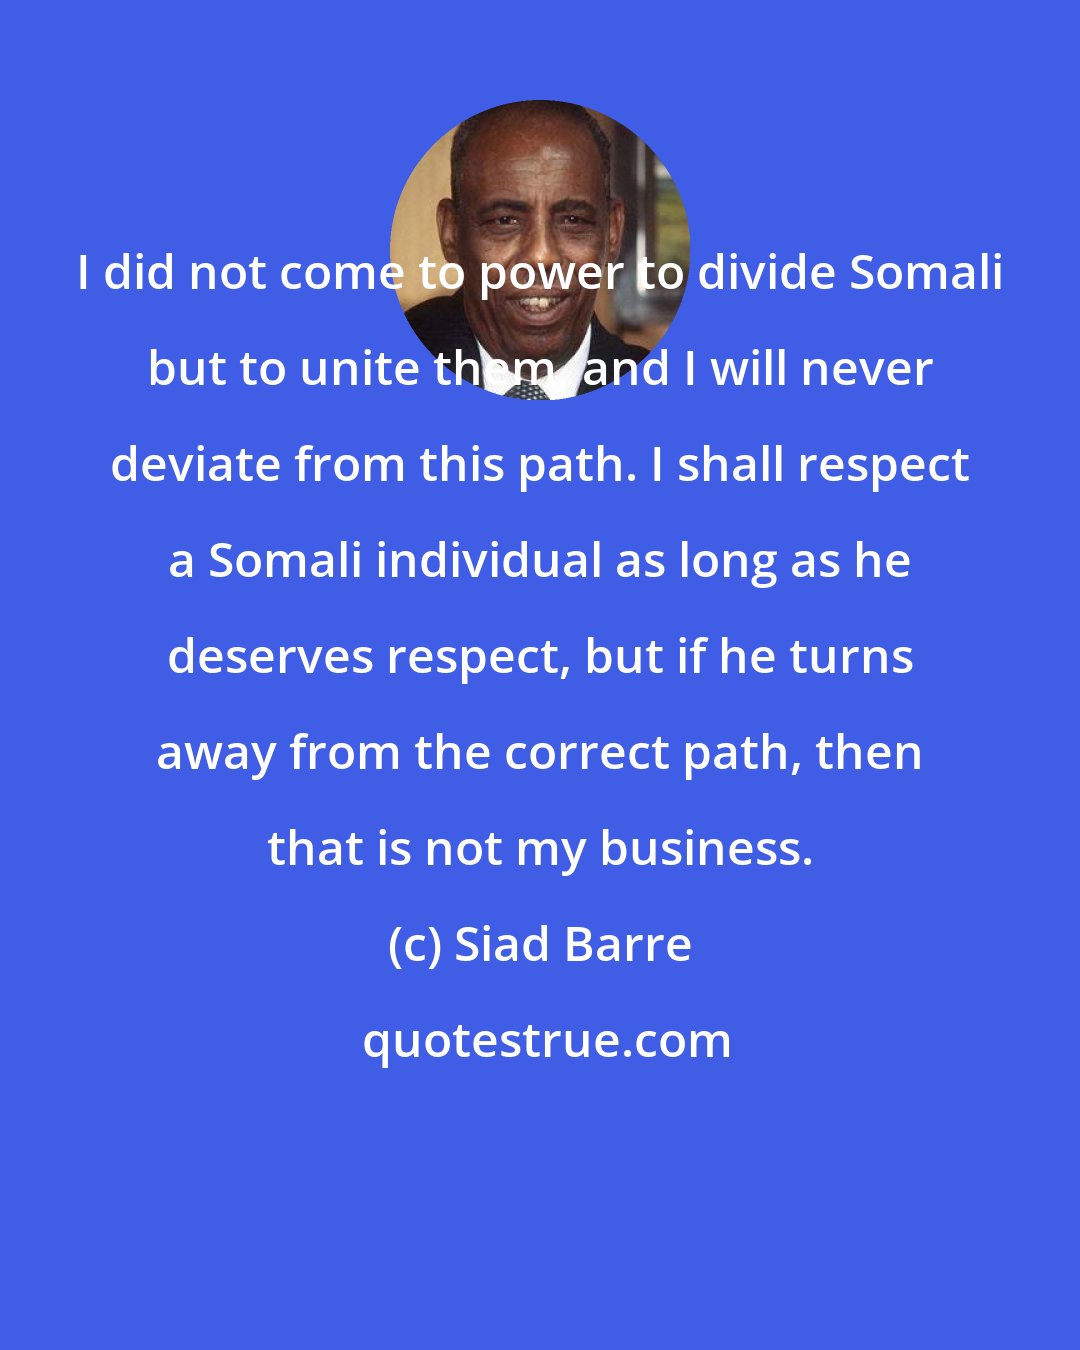 Siad Barre: I did not come to power to divide Somali but to unite them, and I will never deviate from this path. I shall respect a Somali individual as long as he deserves respect, but if he turns away from the correct path, then that is not my business.